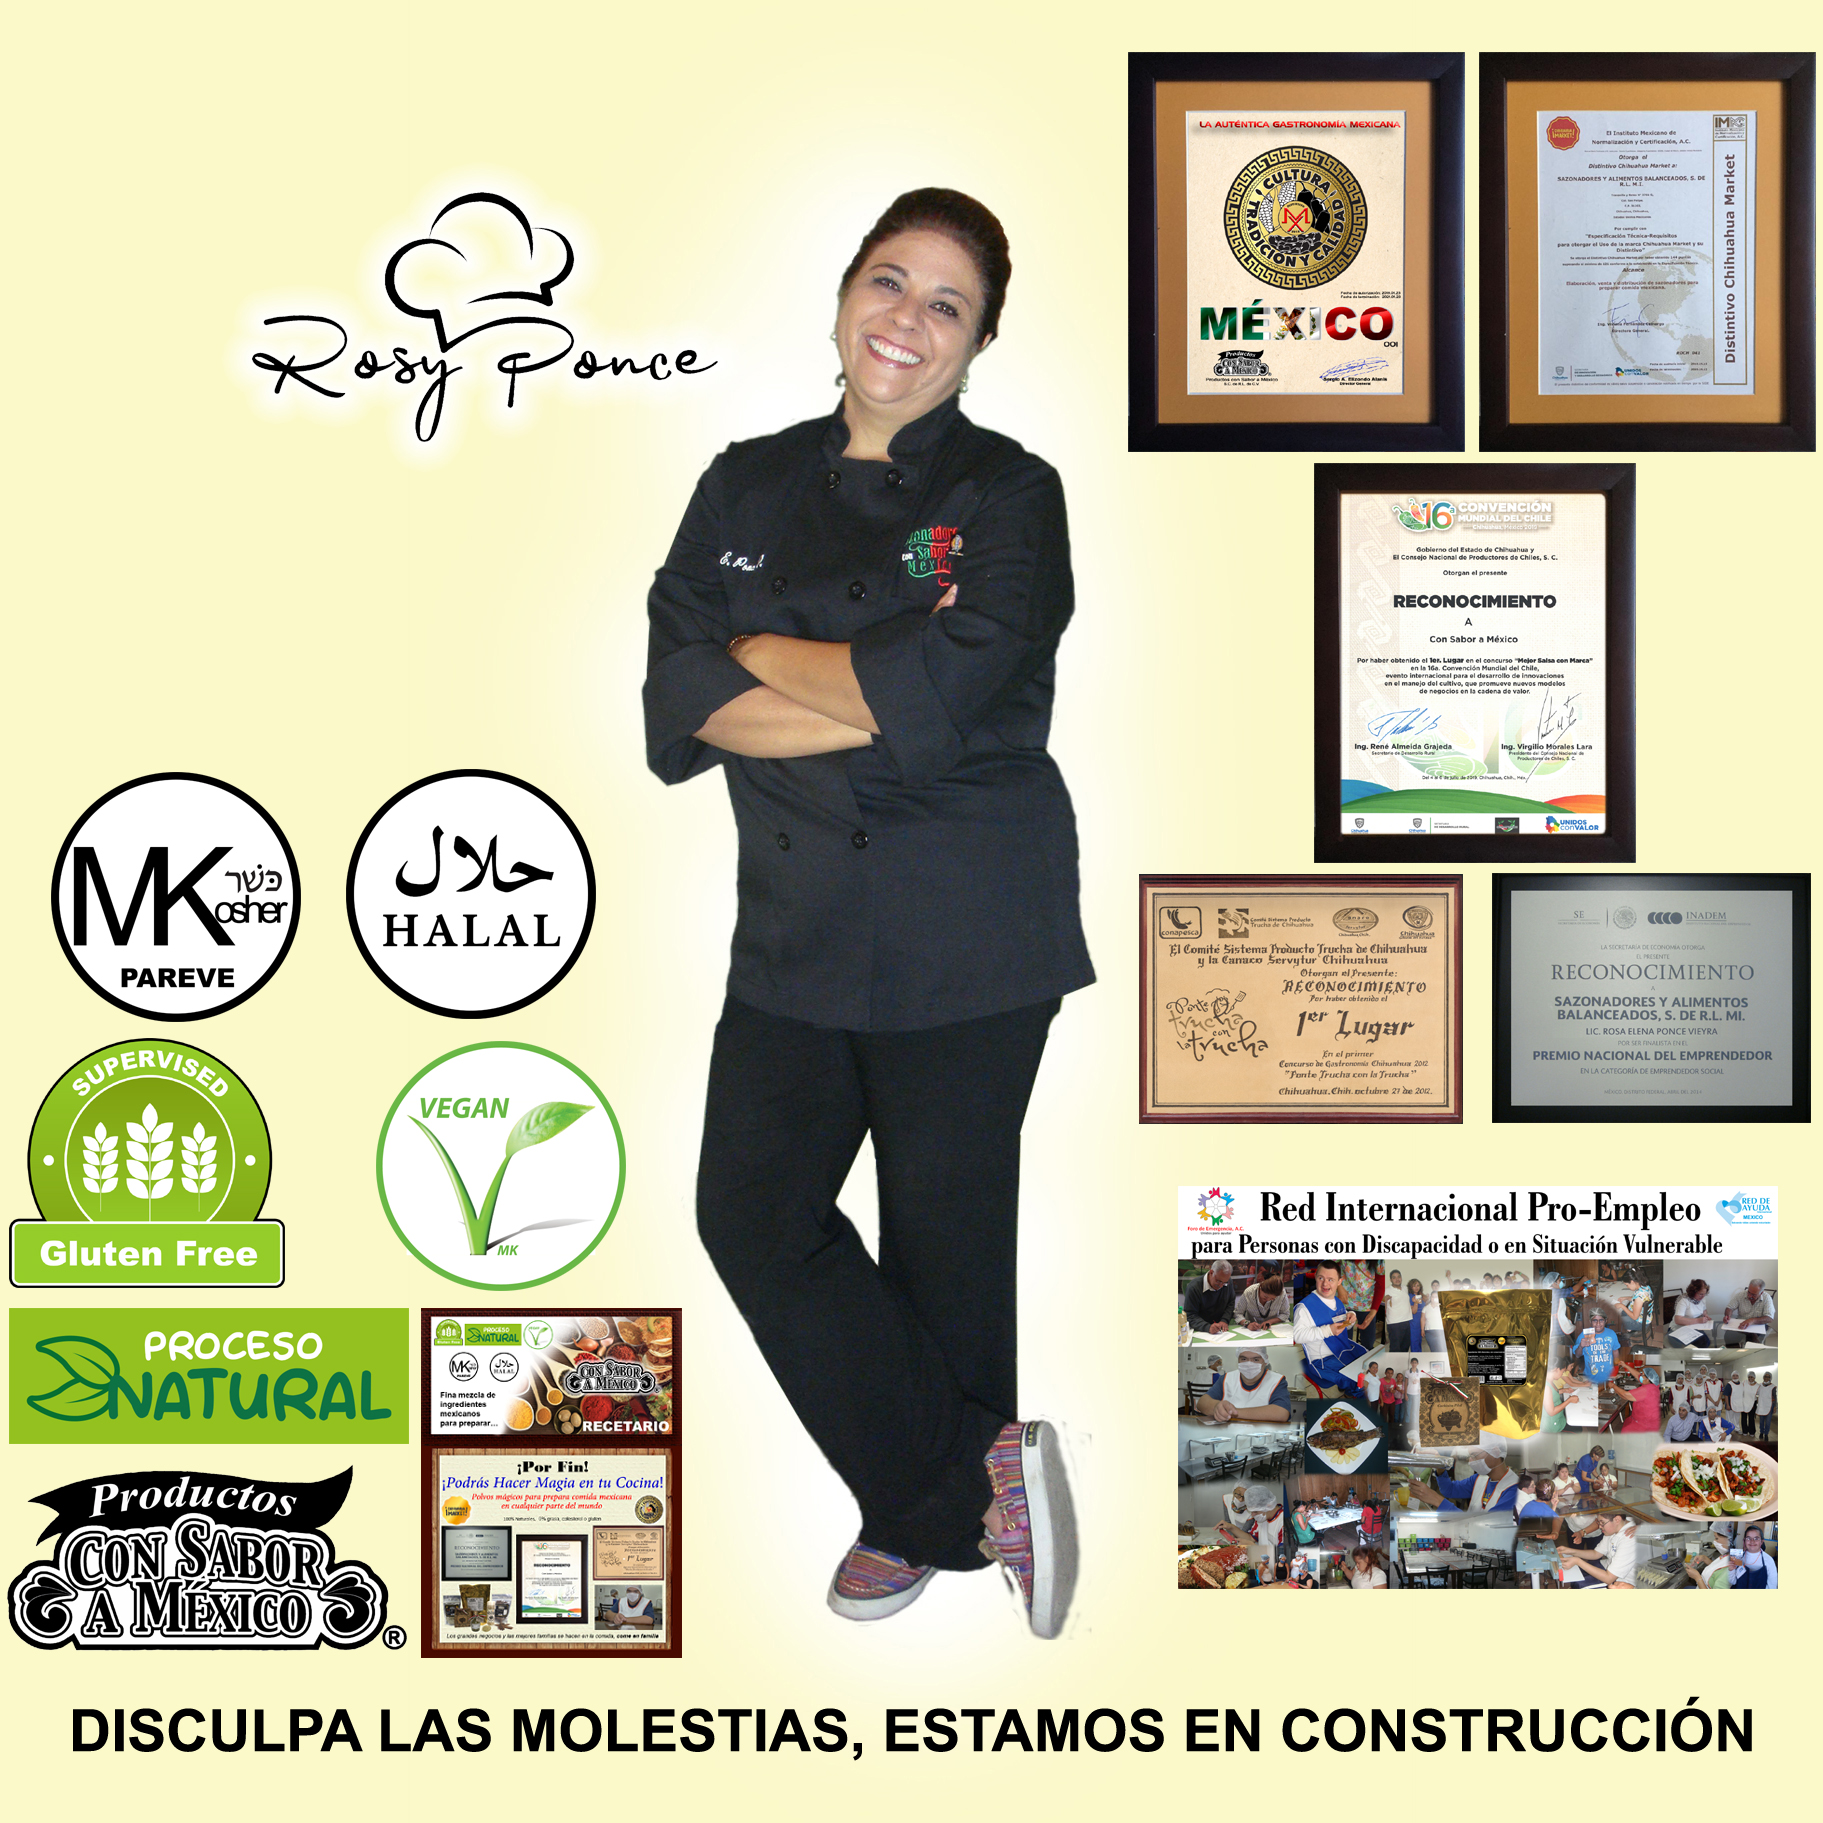 Chef Rosy Ponce